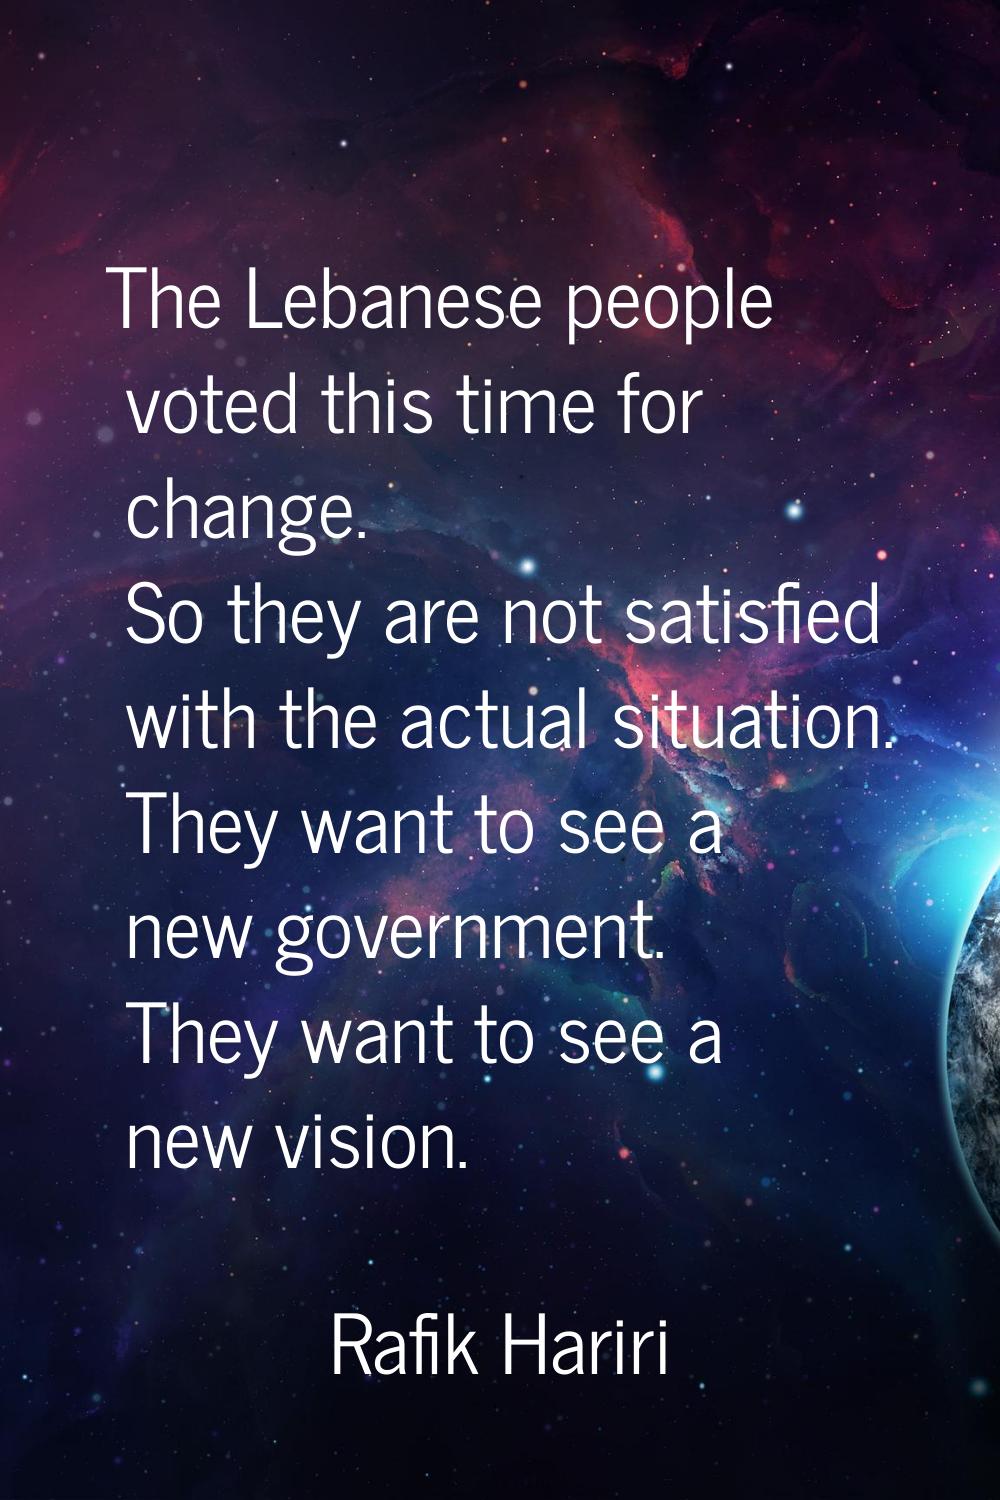 The Lebanese people voted this time for change. So they are not satisfied with the actual situation